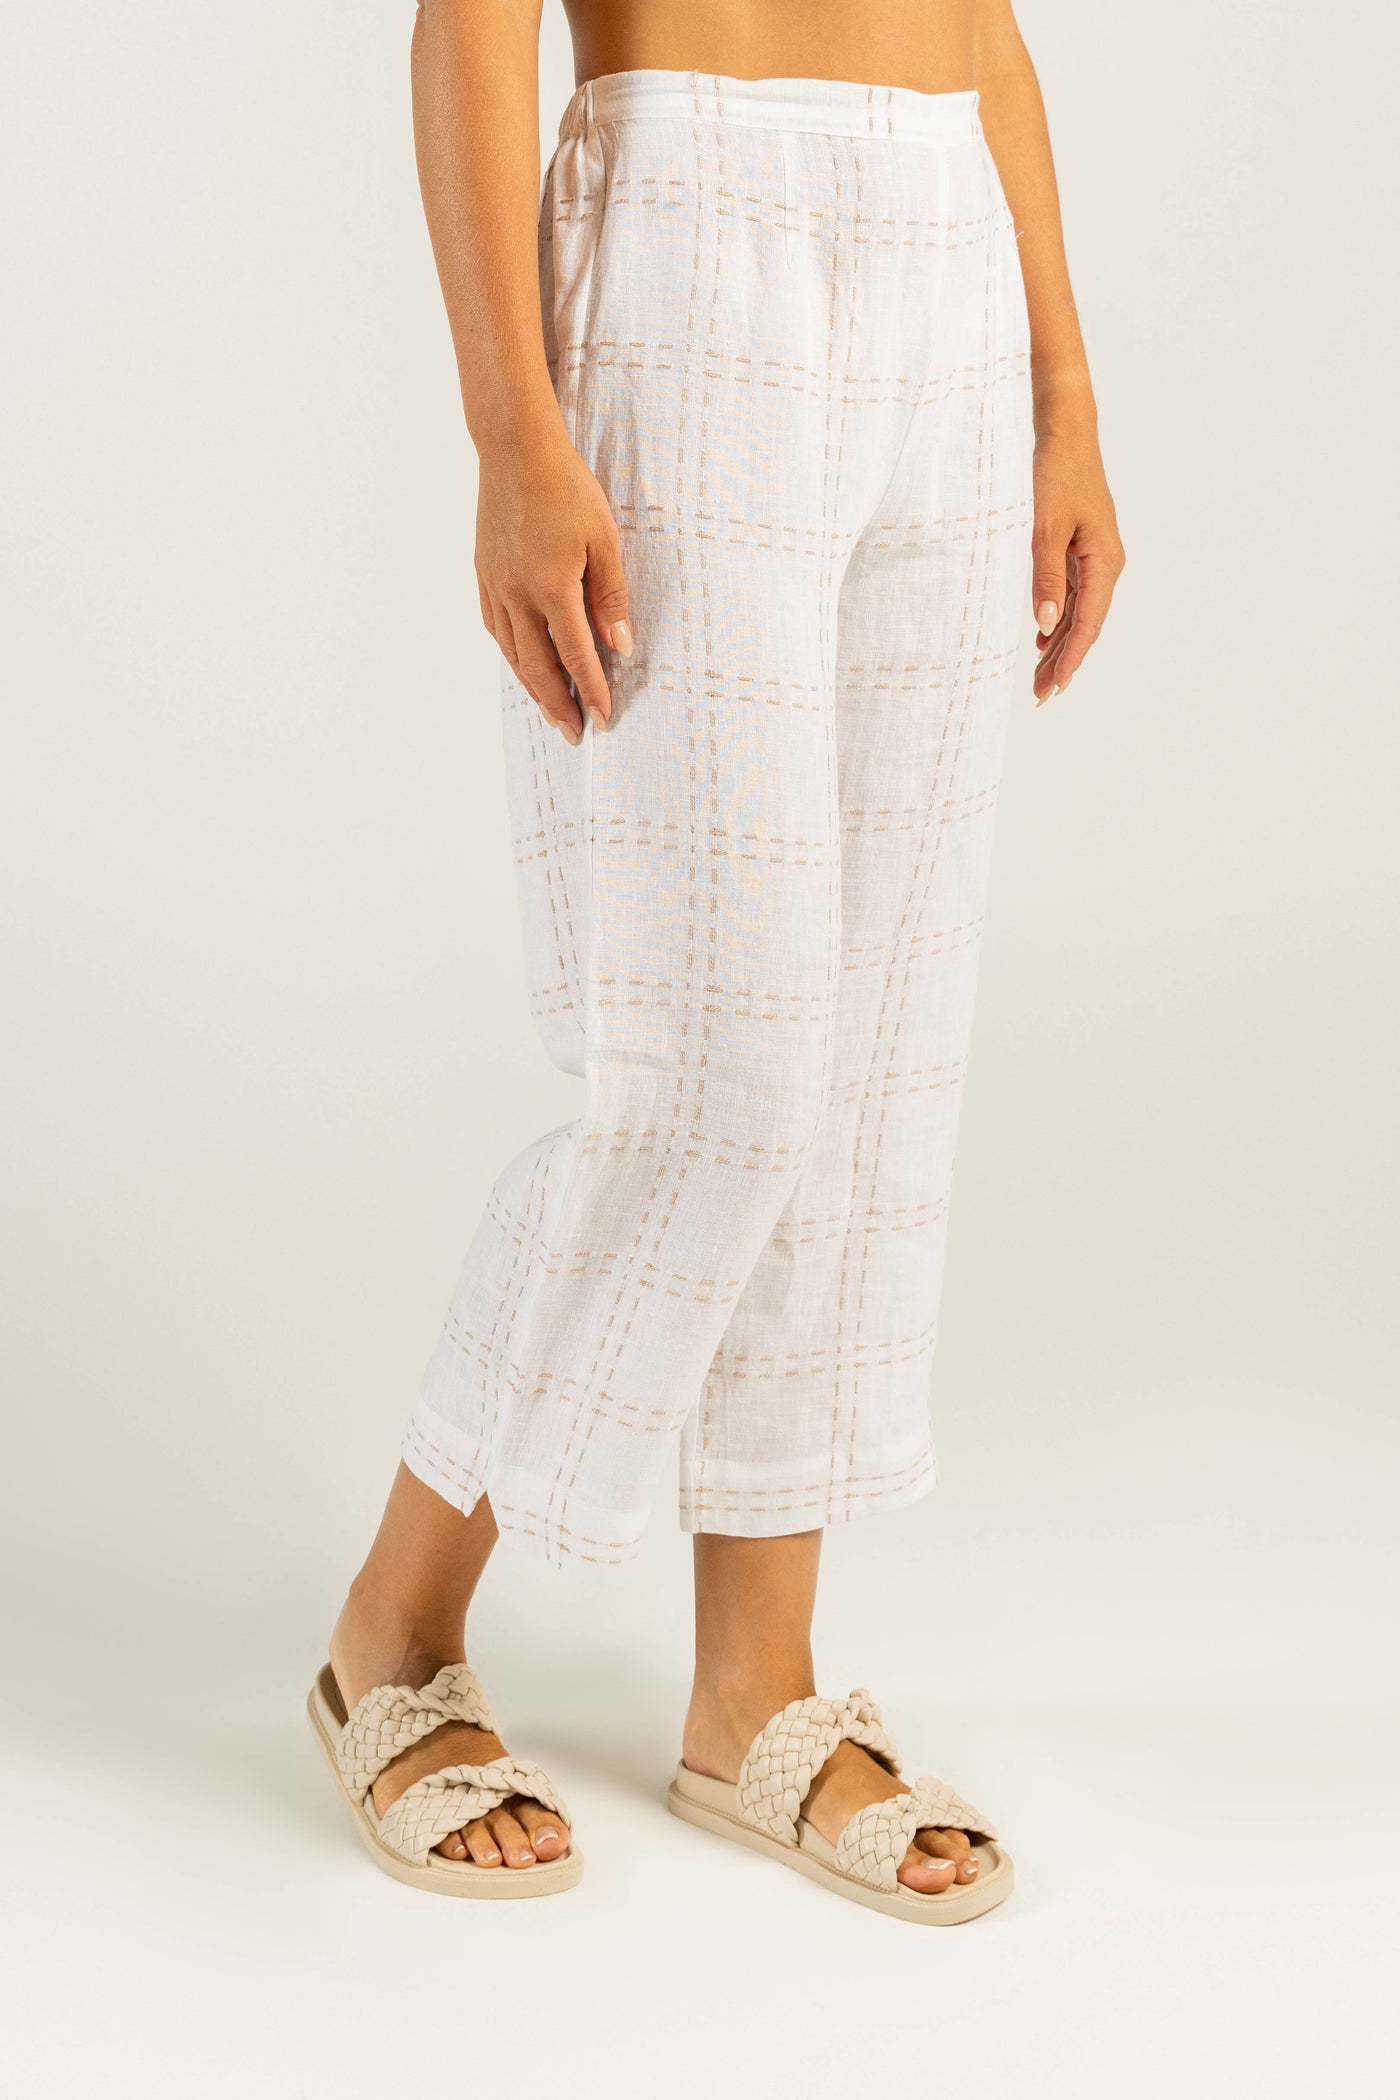  A linen 7/8 pants in white and stone by See Saw